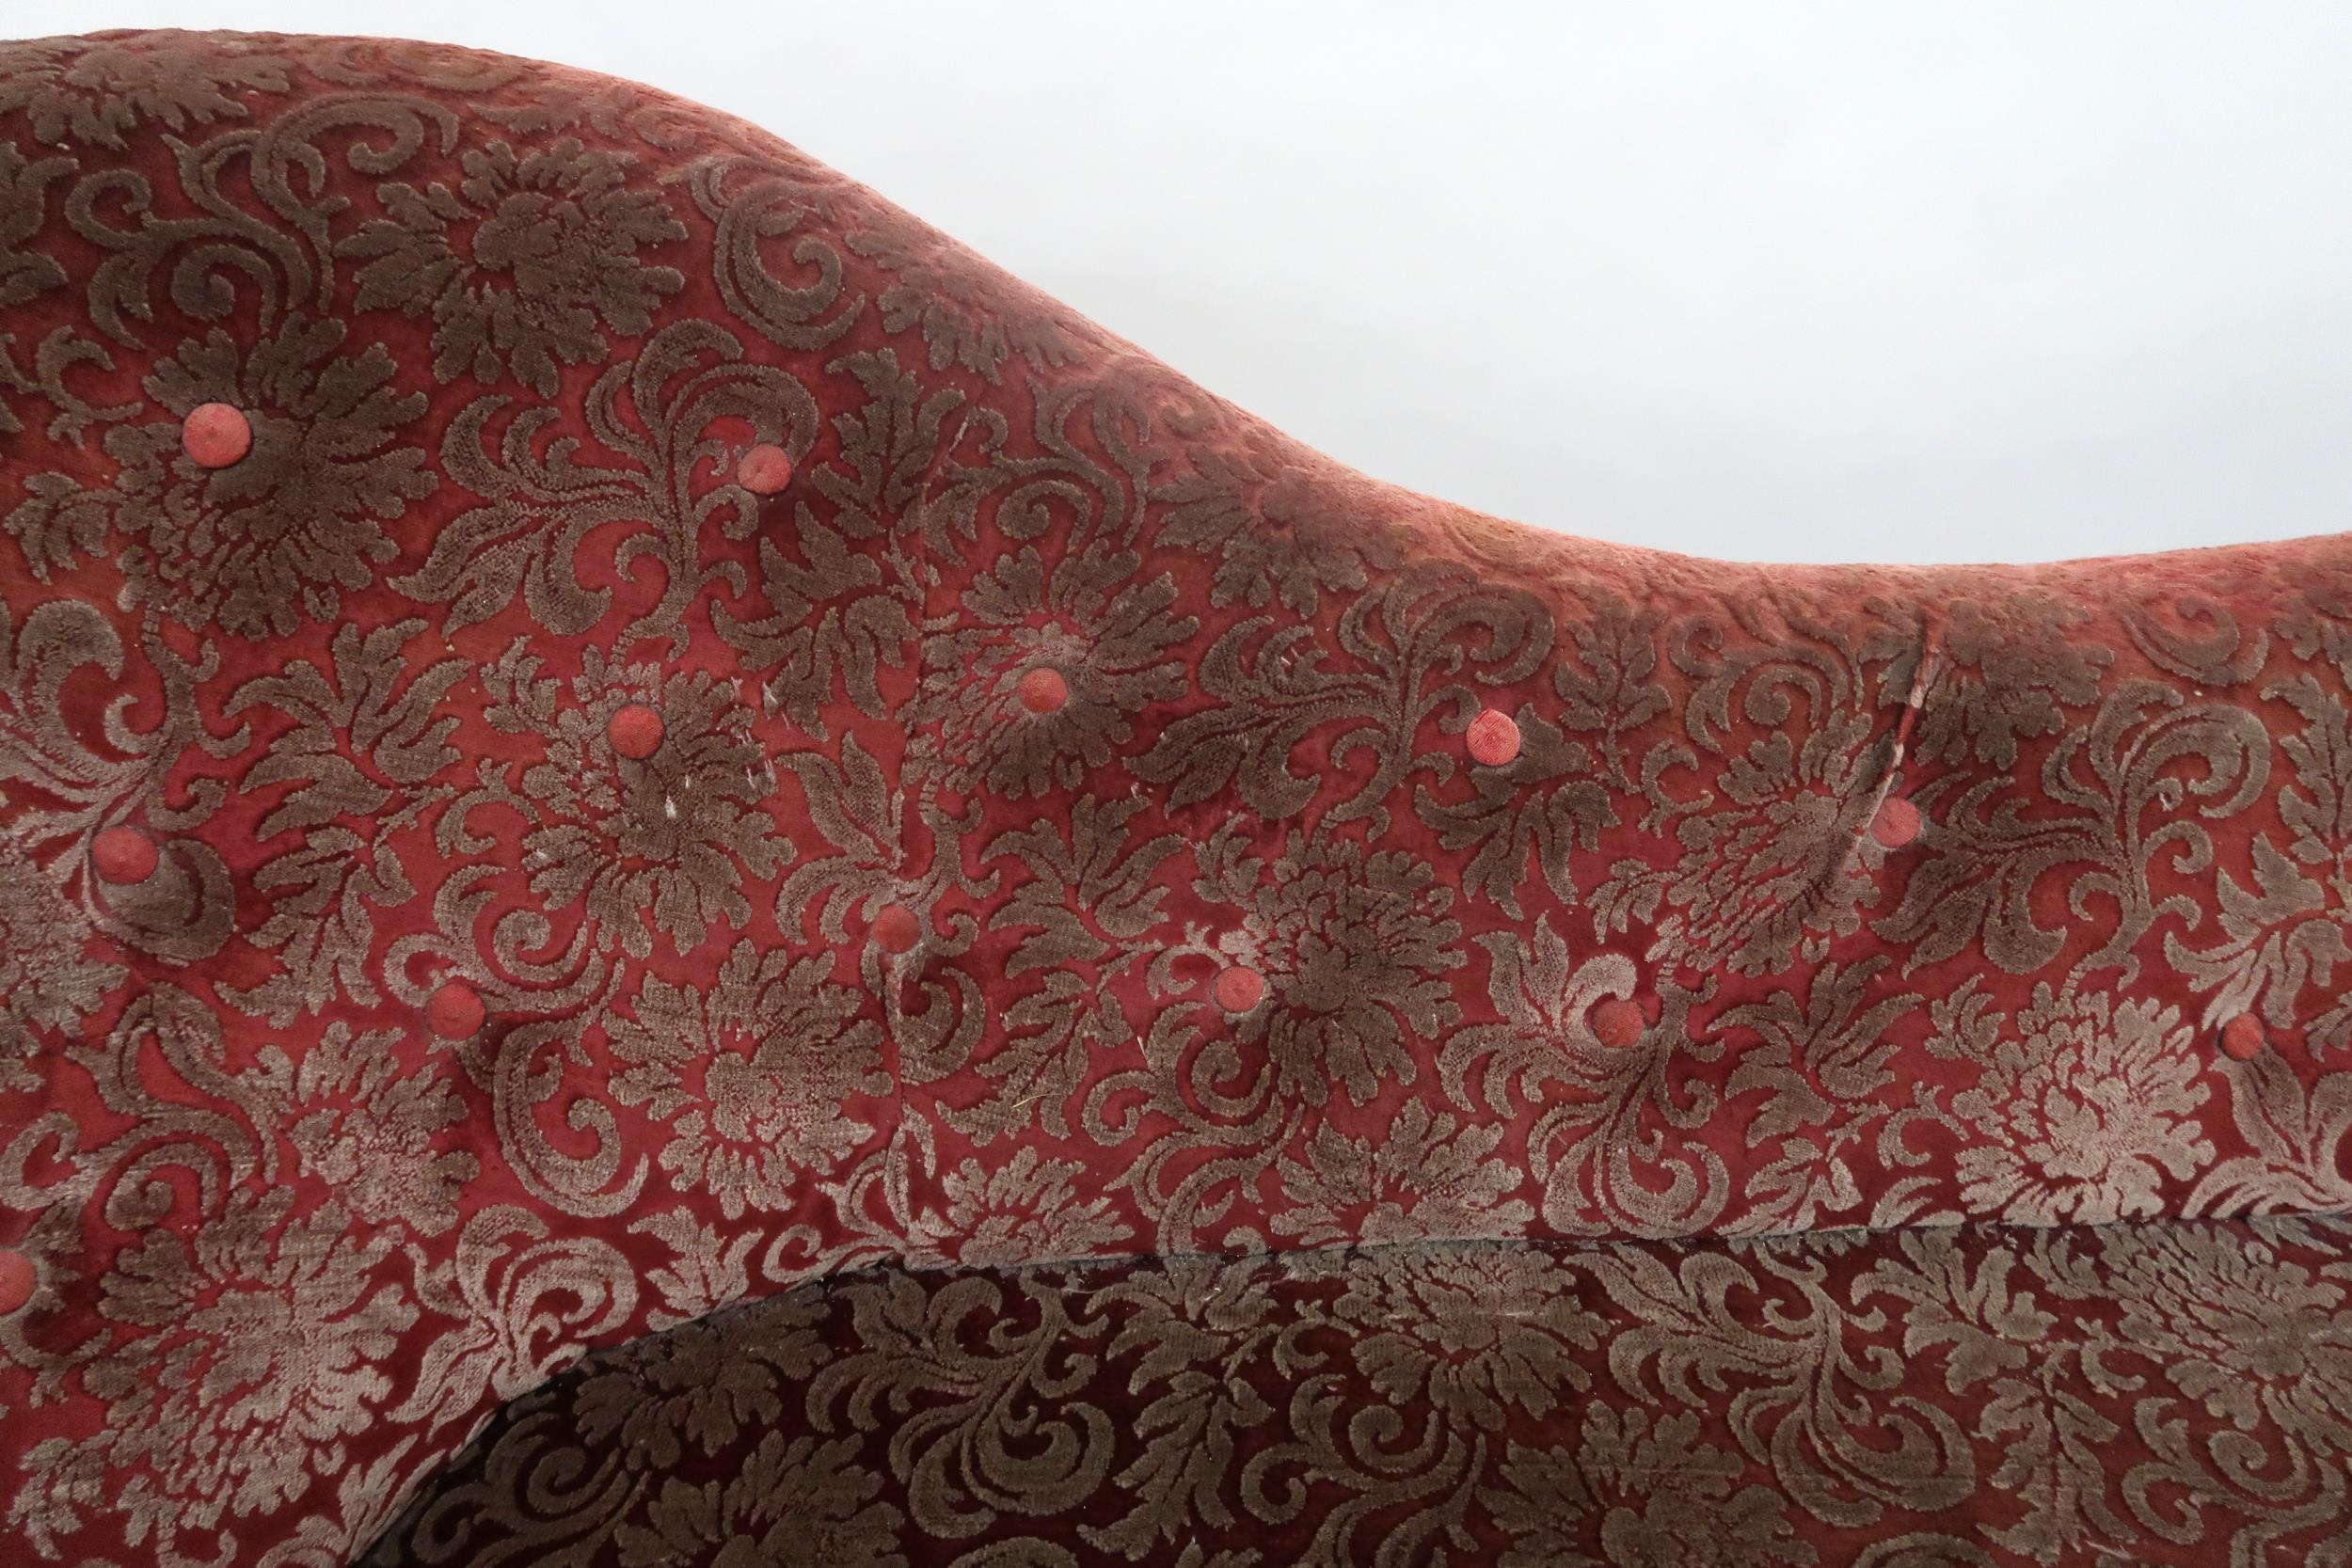 A VICTORIAN MAHOGANY FRAMED CHAISE LONGUE with foliate carvings, buttonback and seat upholstered - Image 4 of 8